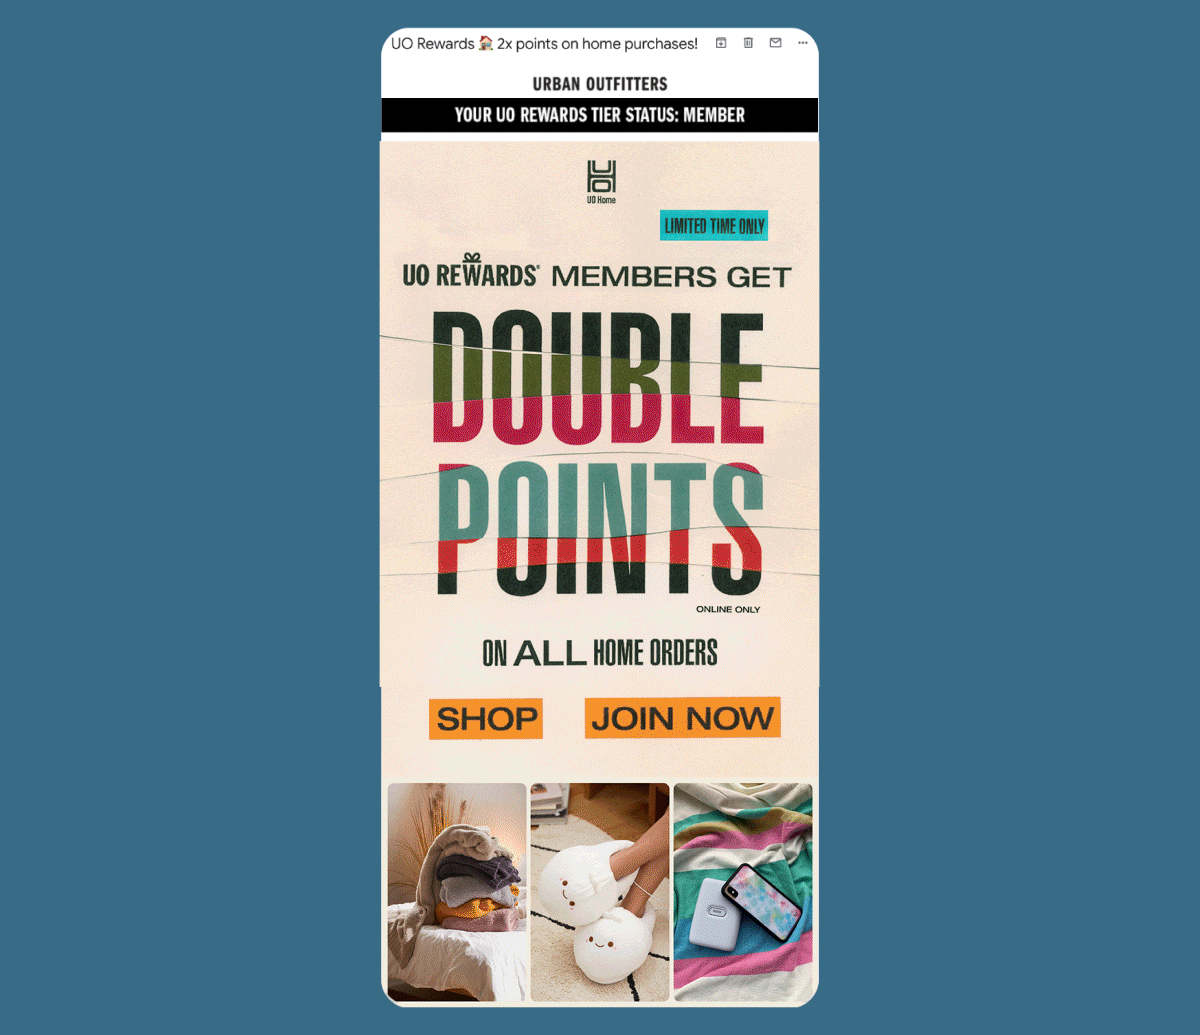 In an eye-catching GIF email, Urban Outfitters offer double points on homewares for all loyalty members who shop online.